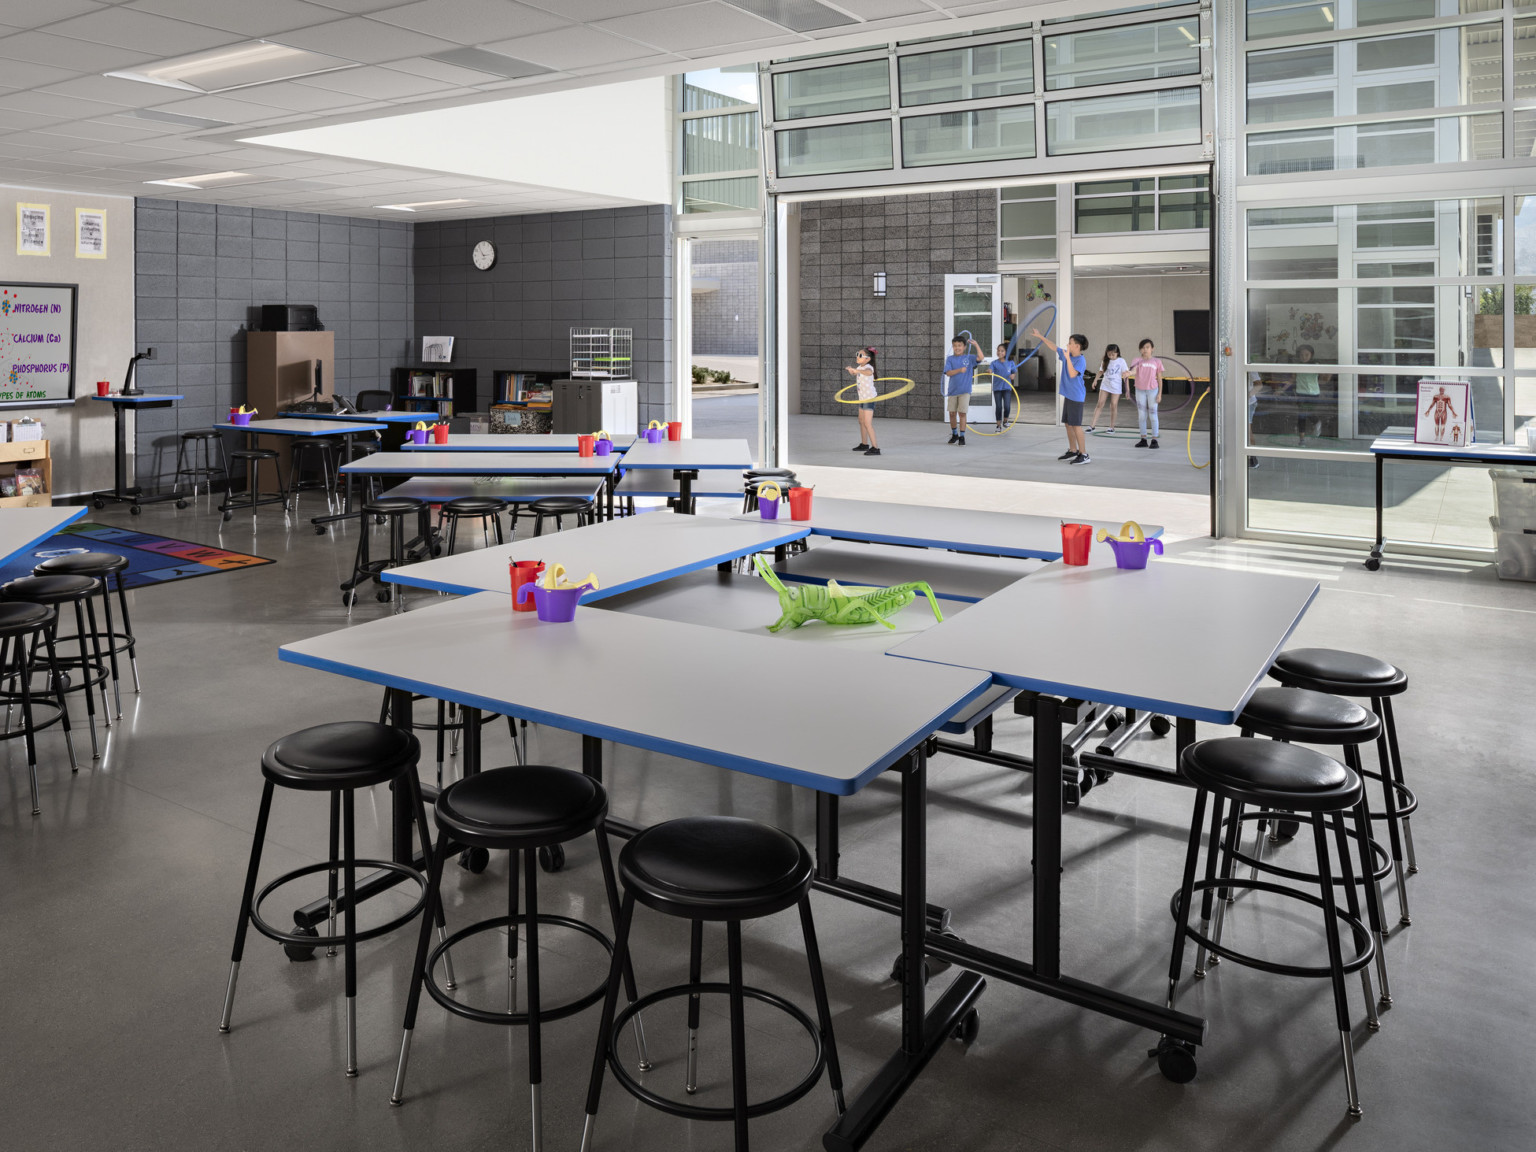 Classroom with flexible furniture, floor to ceiling windows, glass garage door raised to paved outdoor space between classes